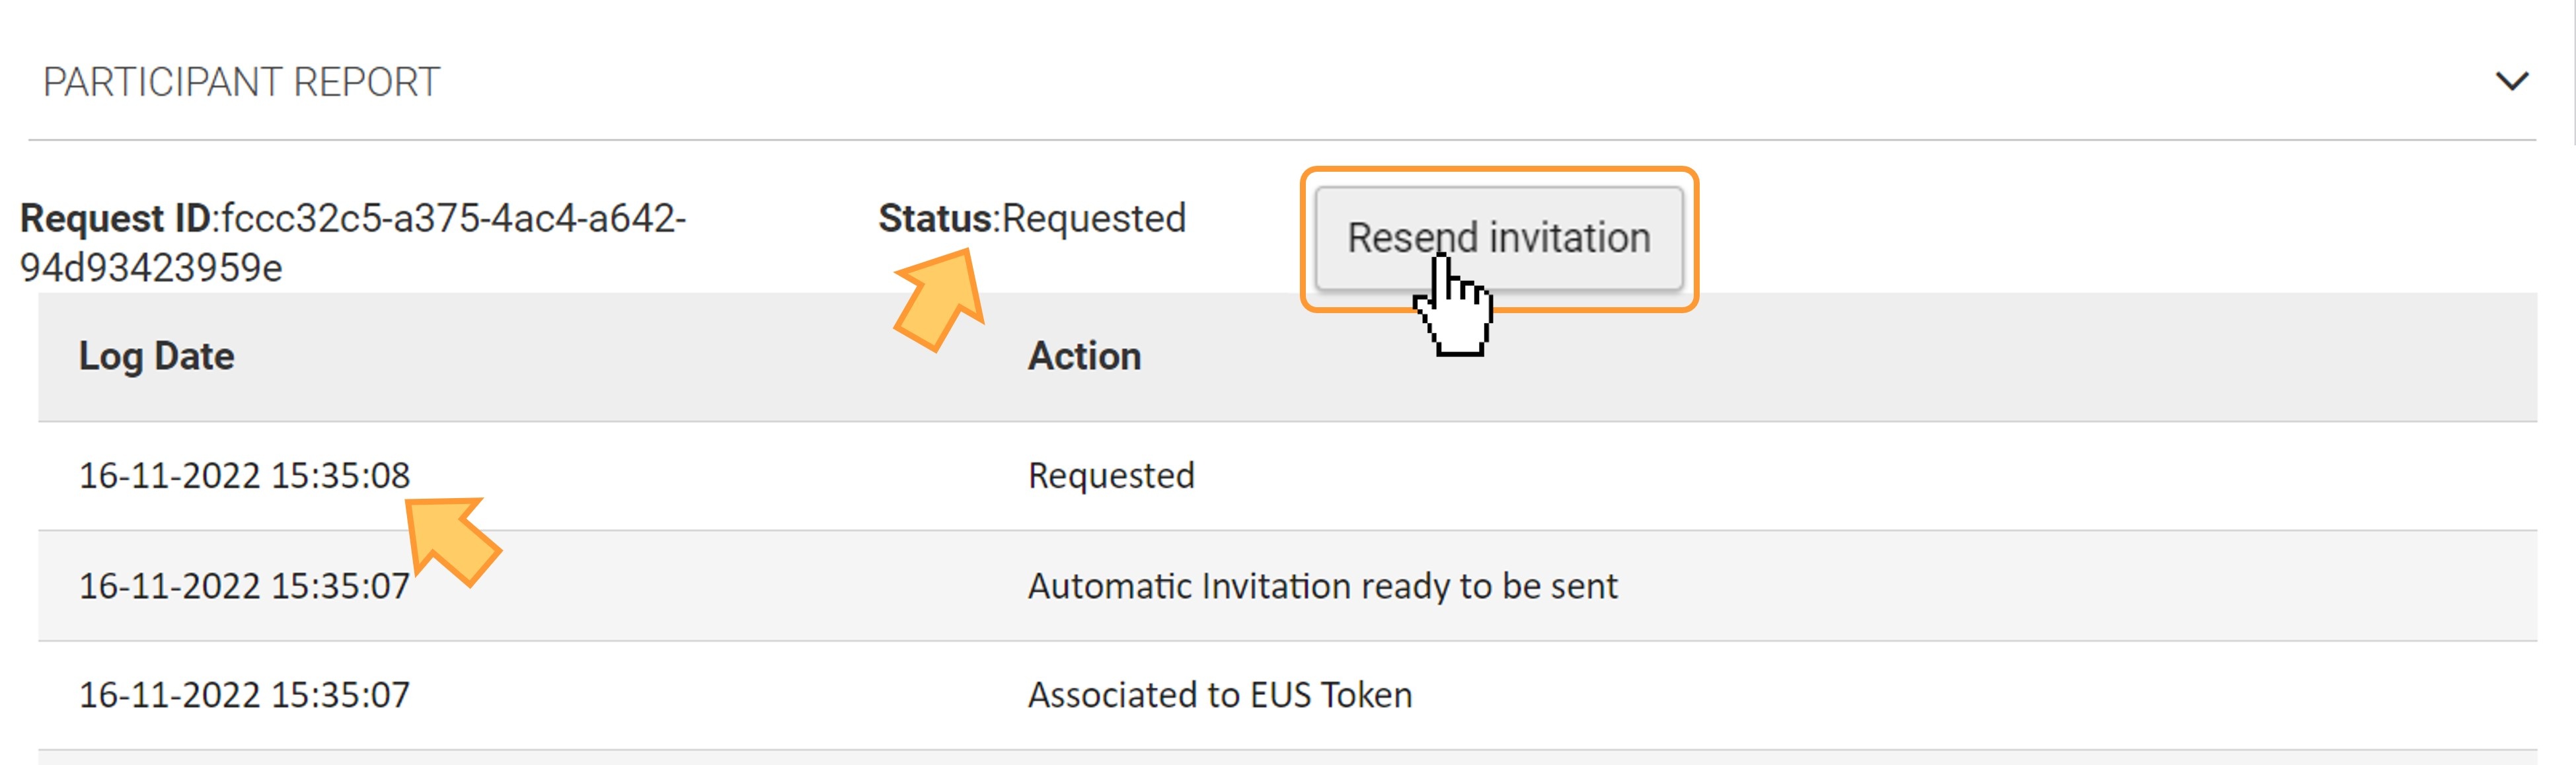 Click on the Resend invitation button to send a reminder